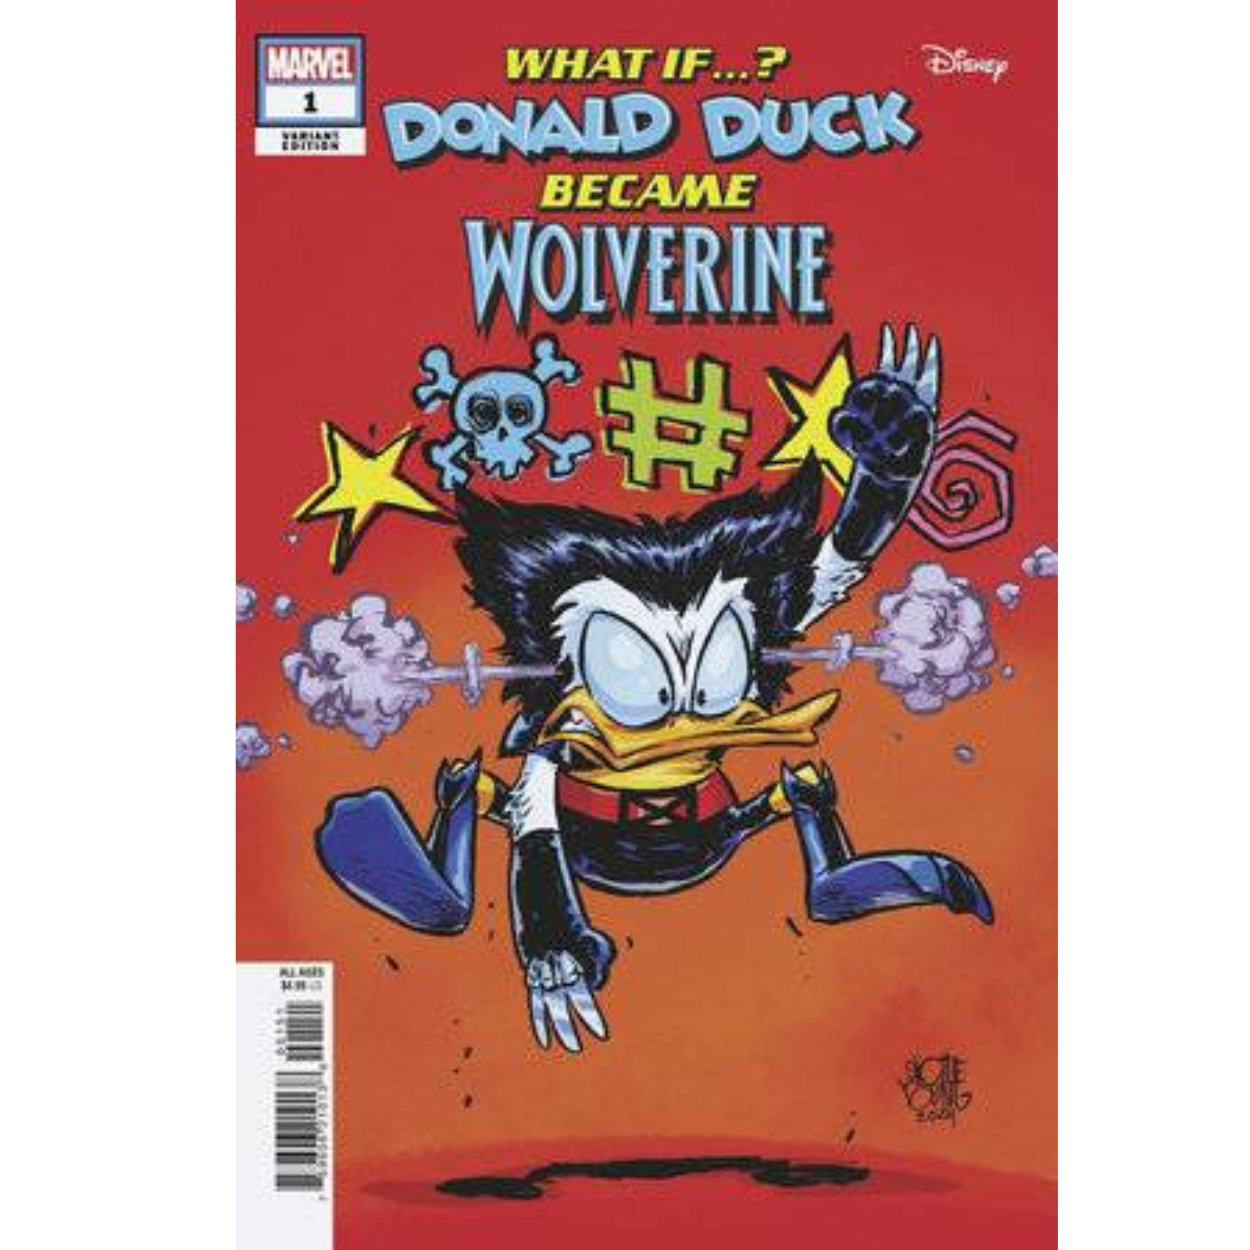 WHAT IF DONALD DUCK BECAME WOLVERINE #1 YOUNG *7/31 PRESALE*